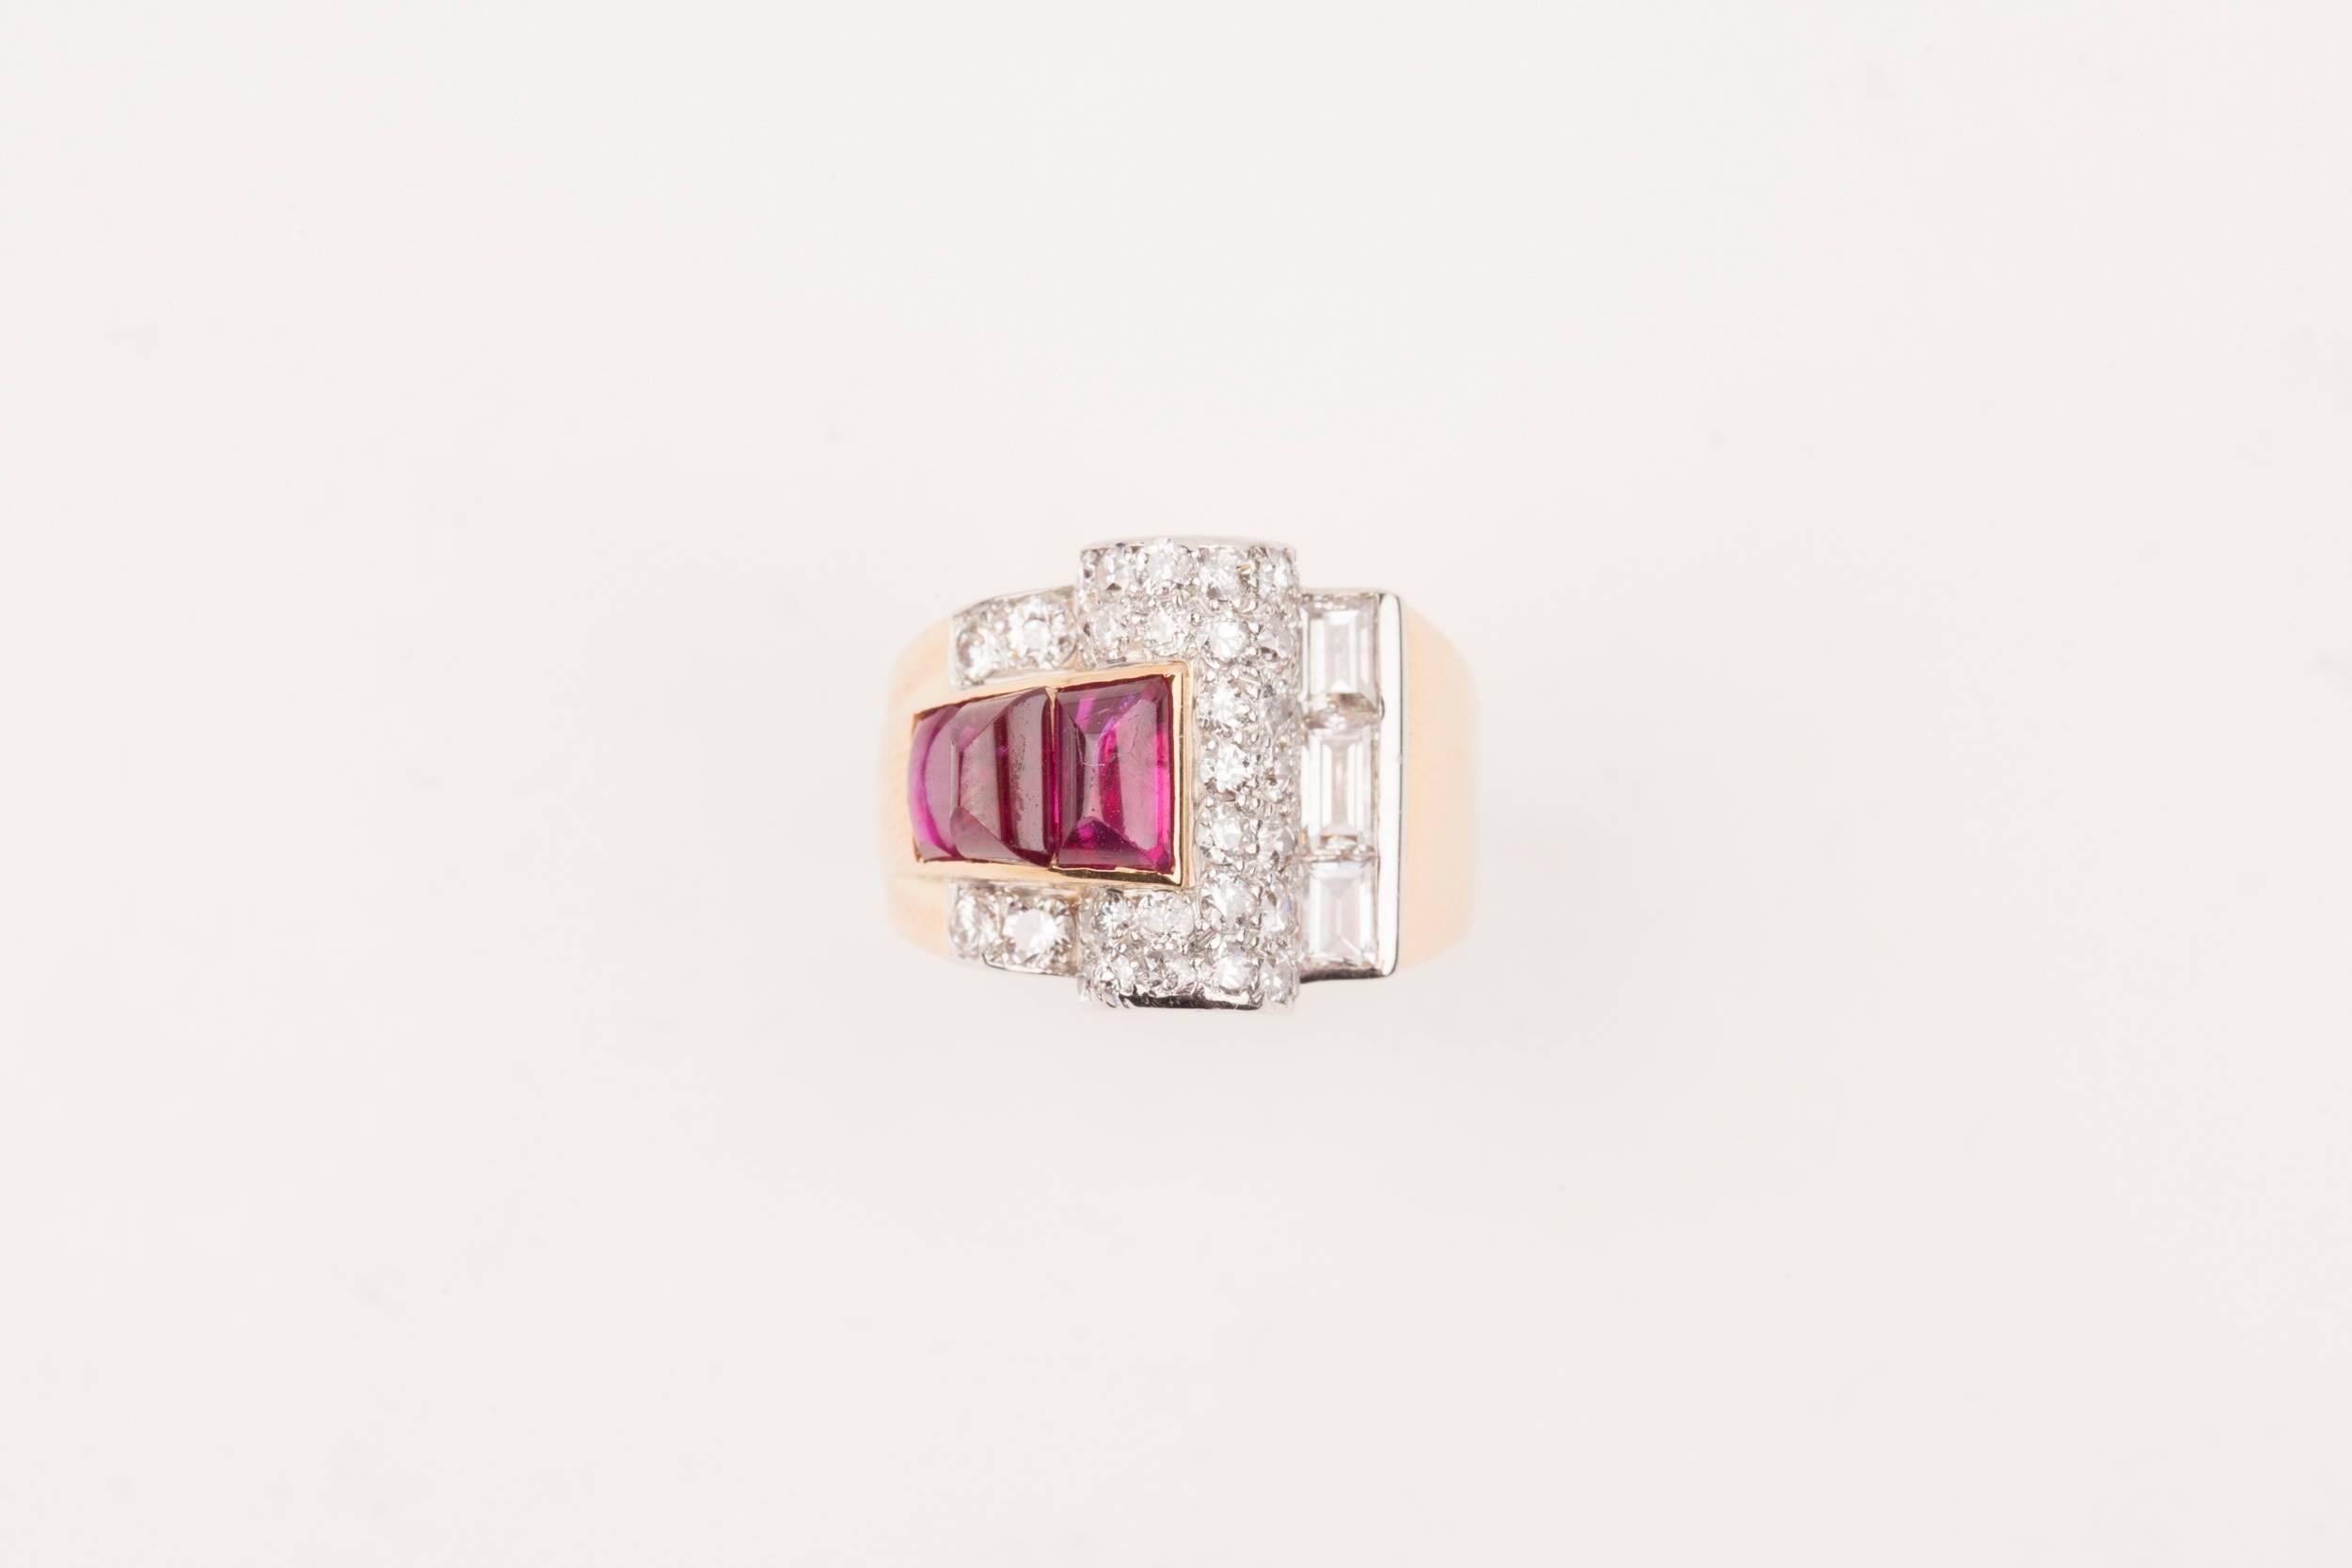 Very chic ring, beautiful Late Art Deco design, circa 1935, gold 18K and platinum. French made.
Set with high quality Diamonds and beautiful natural Cabochon Burmese rubies.
The weight of the rubies is approximately 3 carats.
The diamonds weights